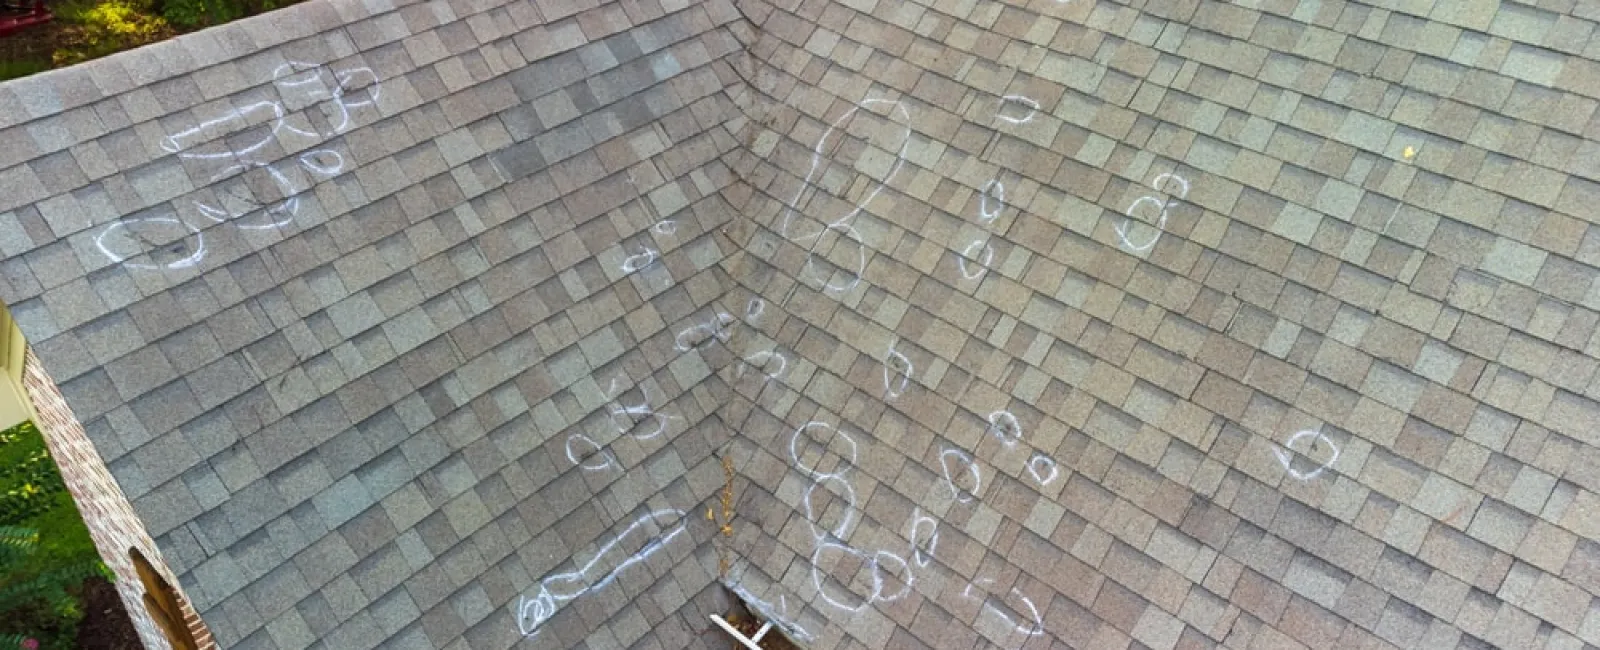 Signs of Hail Damage on Roof - Hail Roof Damage